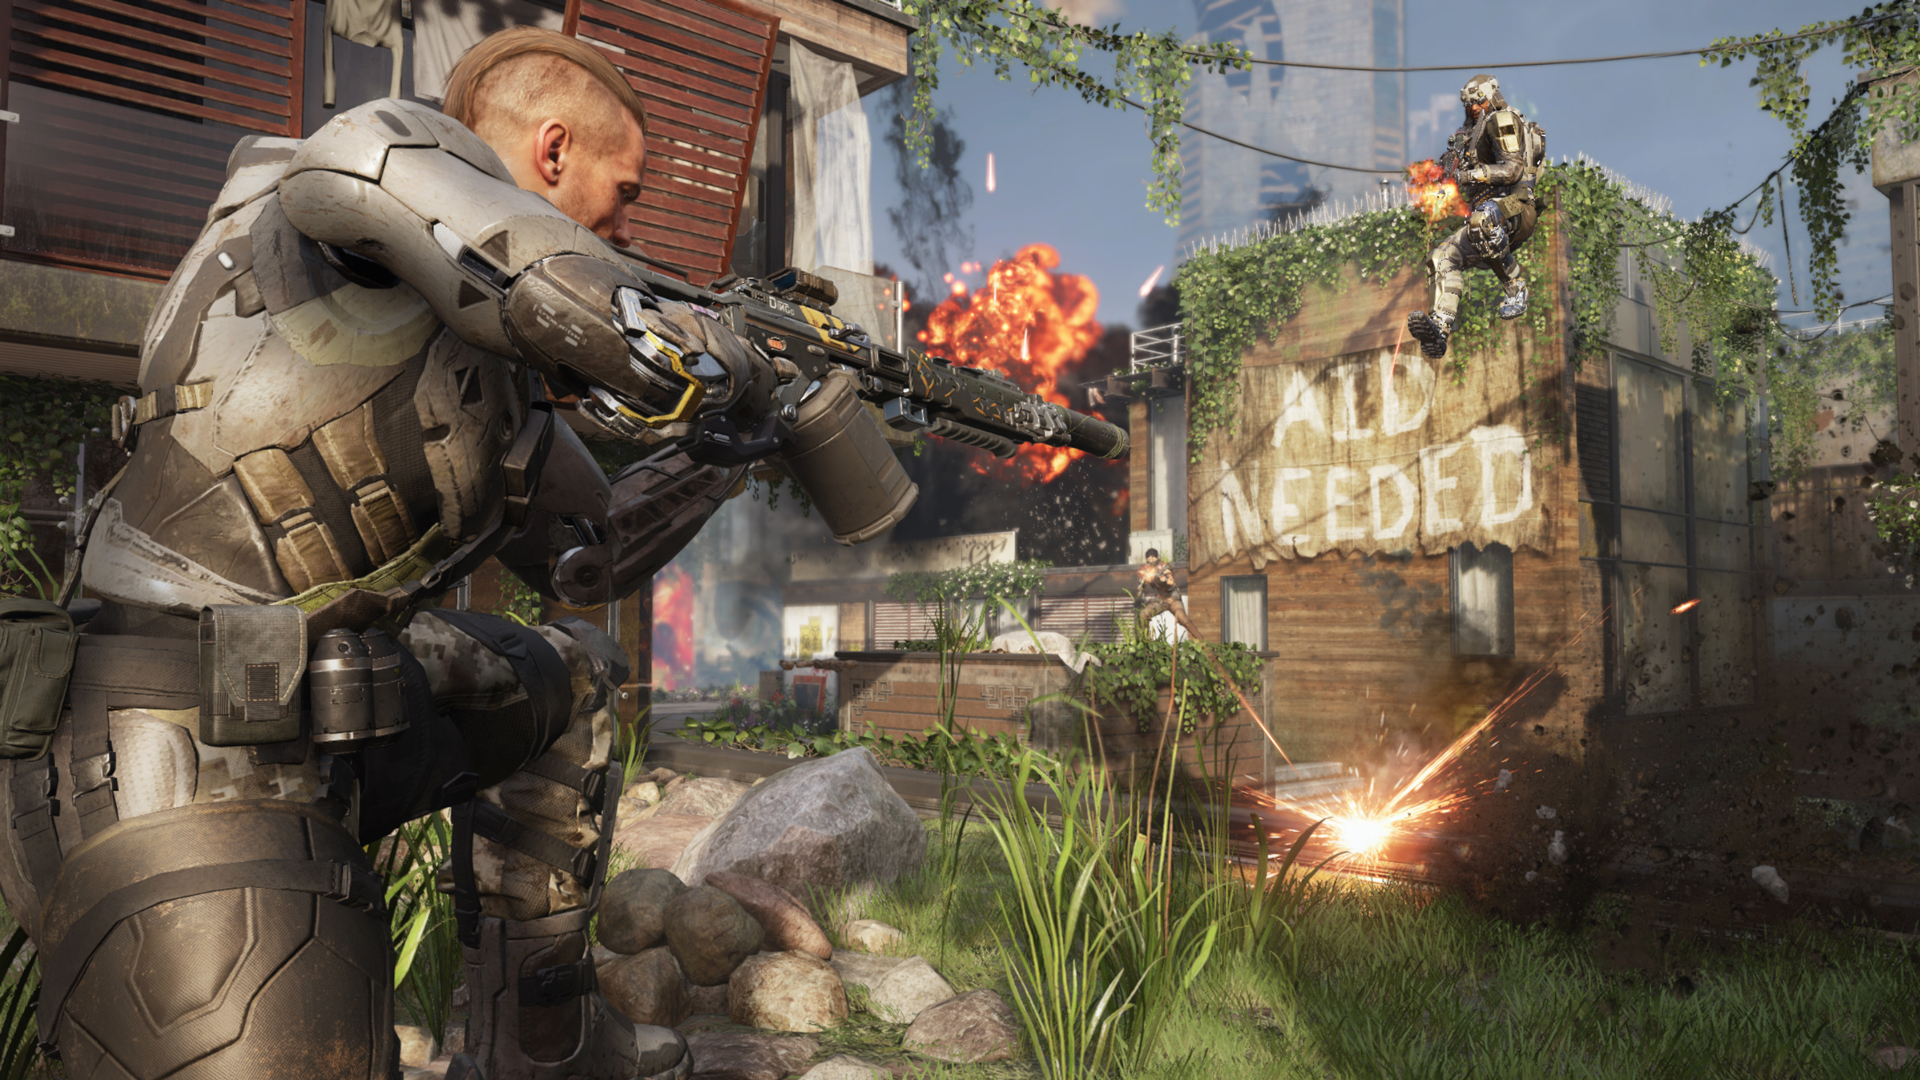 Call of Duty: Black Ops III - Multiplayer Starter Pack on Steam